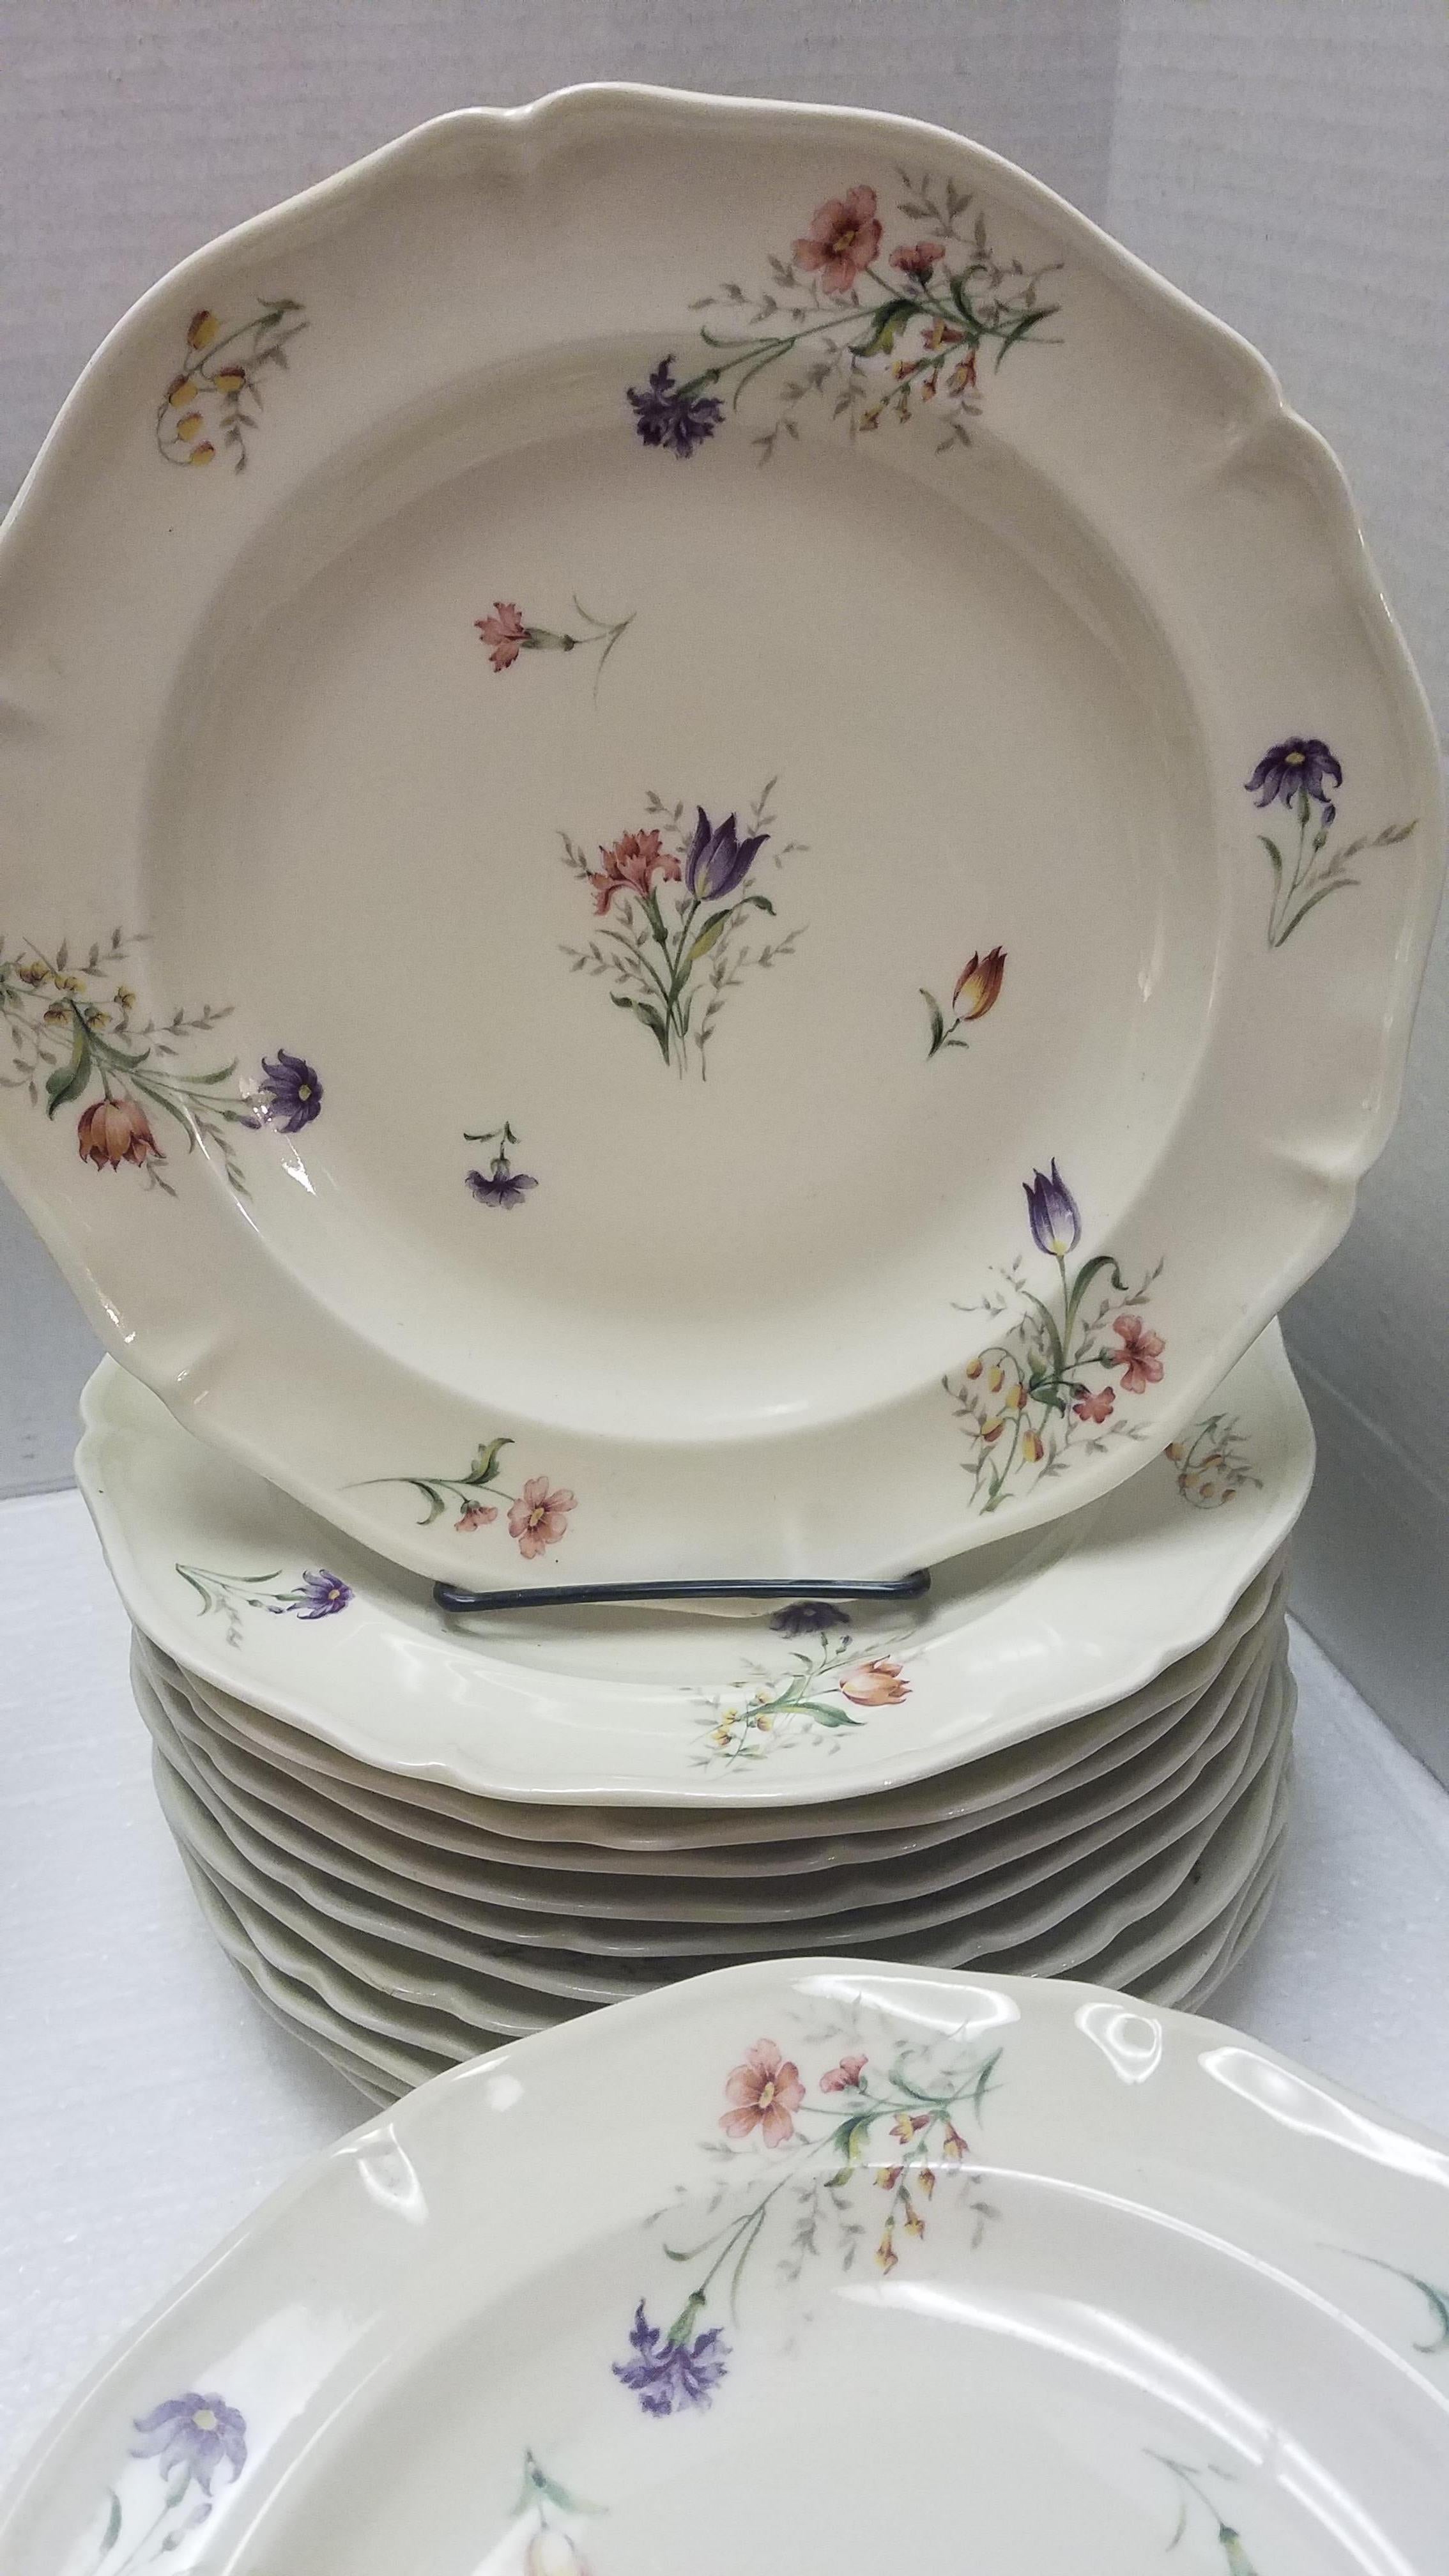 Set of vintage French Limoges dinnerware. See makers marks on the back of the pieces. Purchased from the Brittany region of France. Beautifully hand painted with scattered flowers in shades of pink yellow and purple with green foliage. The set